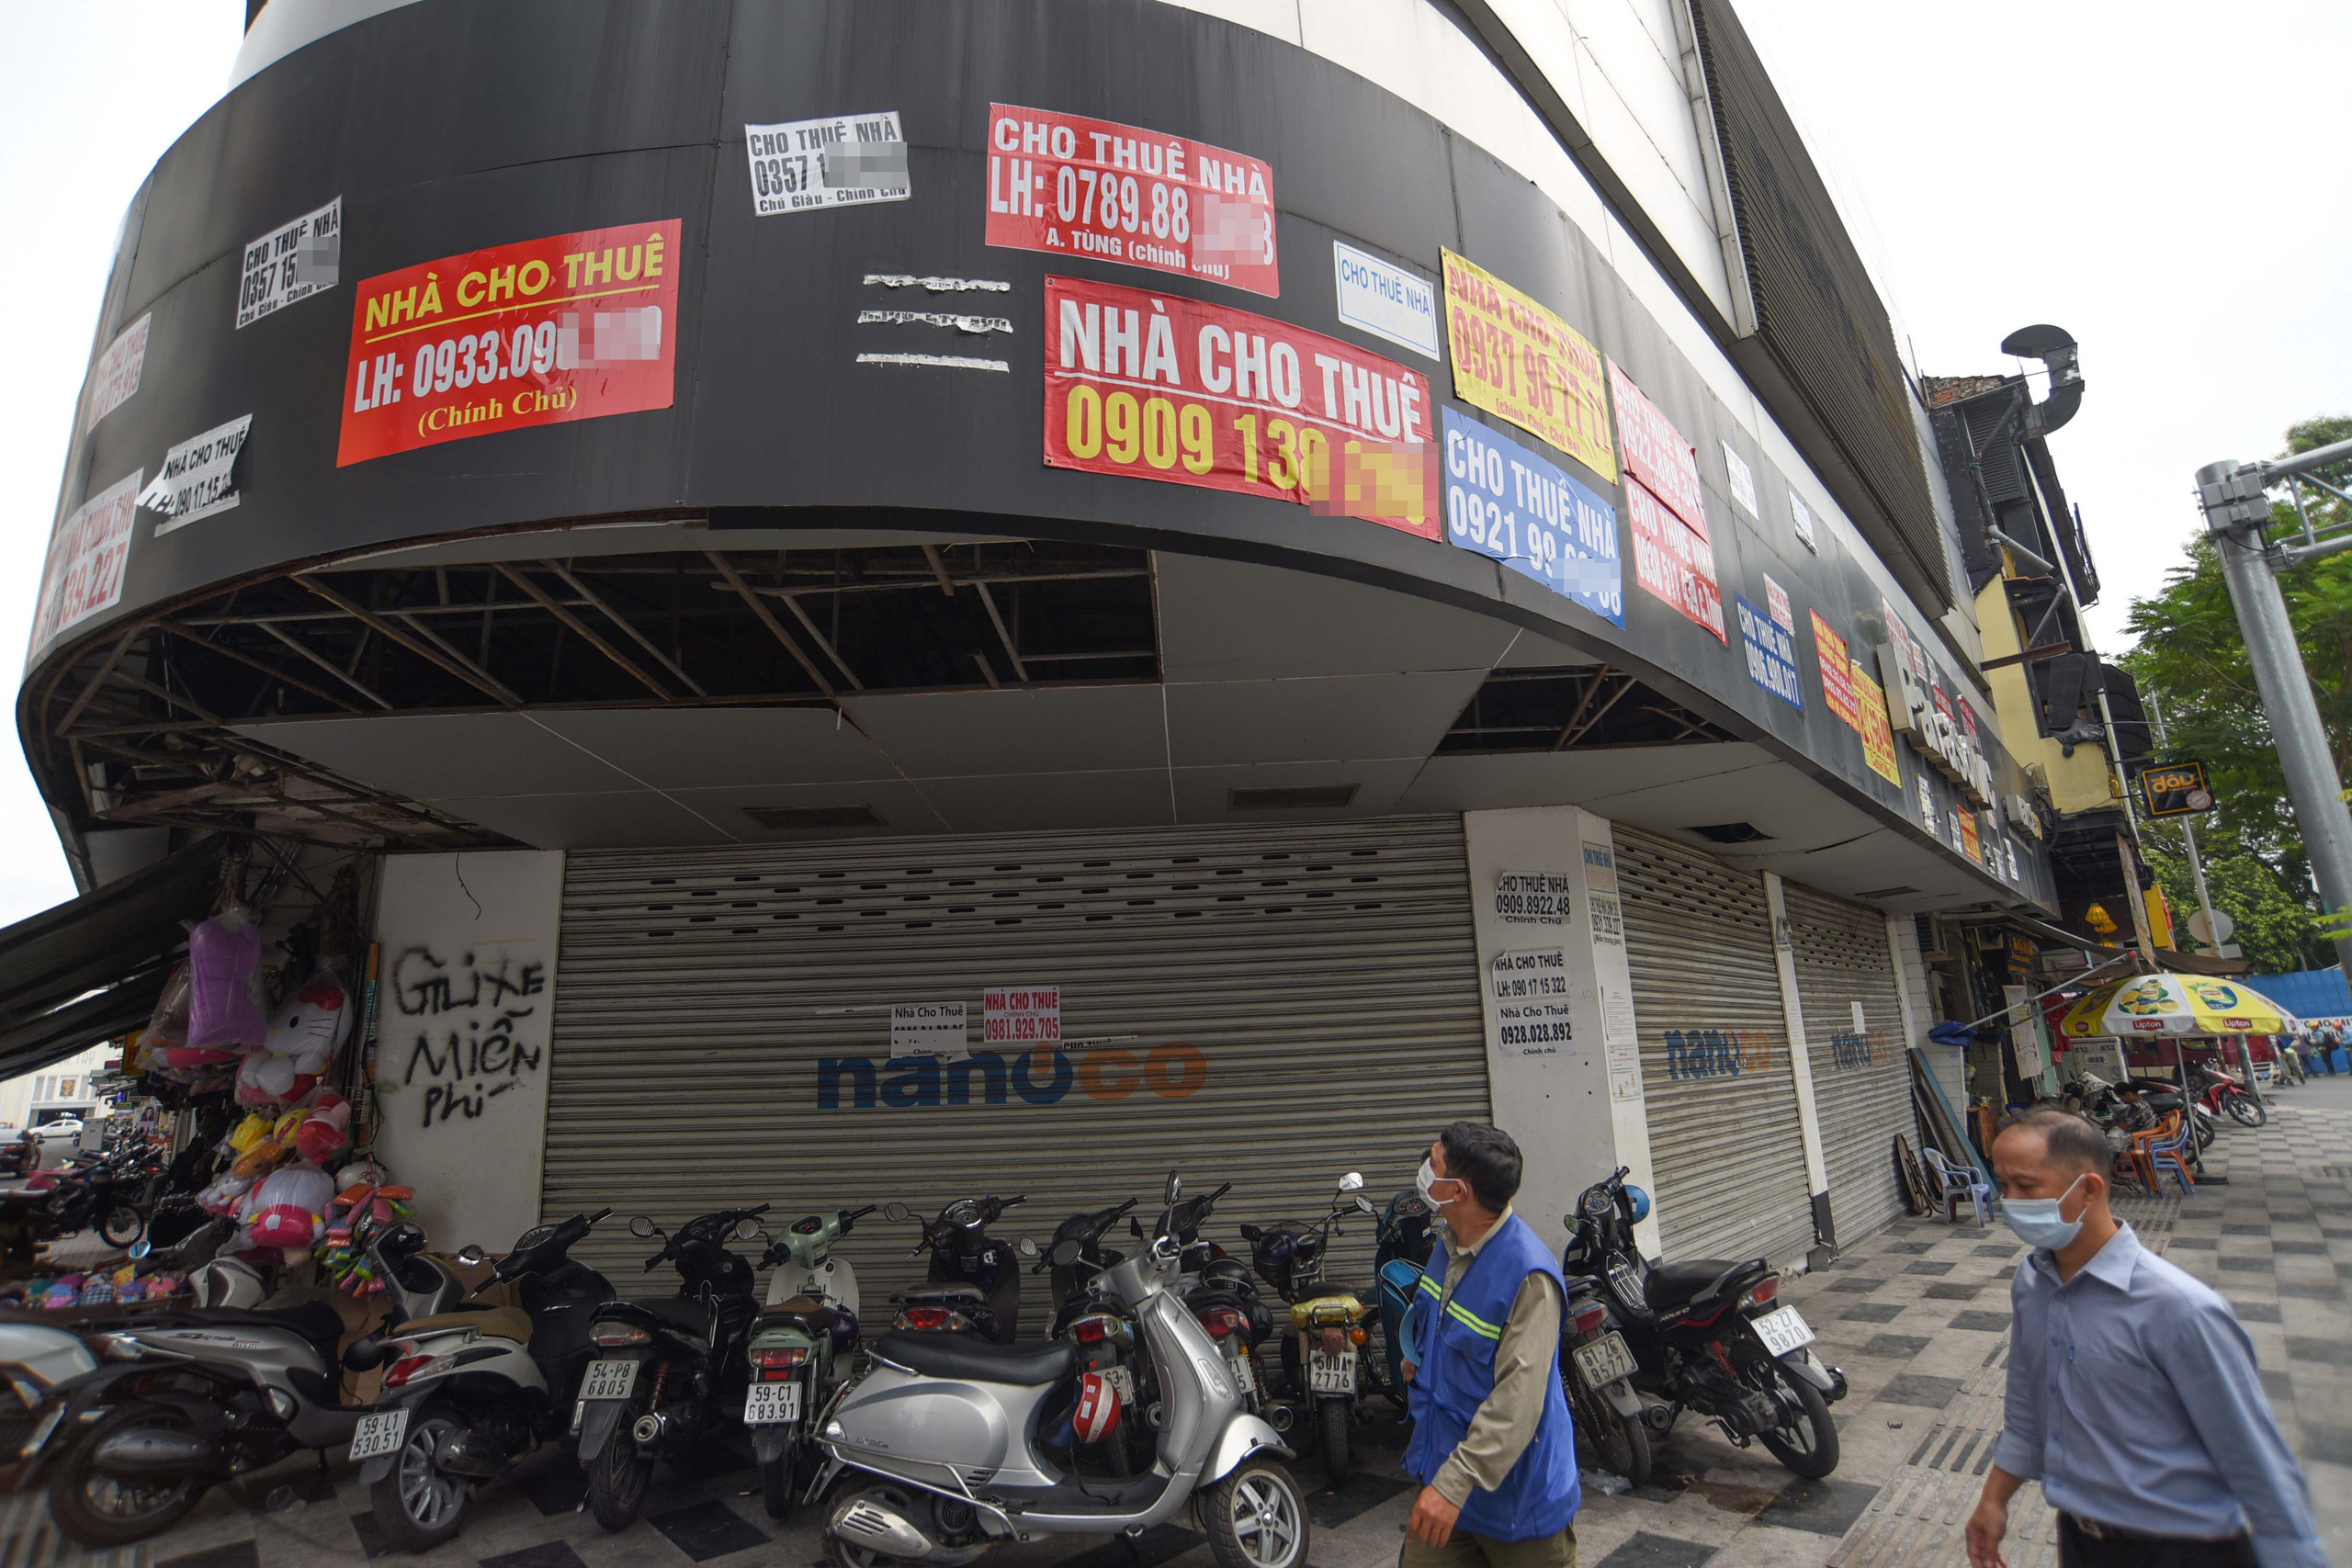 A commercial space is for rent at the corner of Nguyen An Ninh and Truong Dinh Streets in District 1, Ho Chi Minh City, December 7, 2020. Photo: Quang Dinh / Tuoi Tre